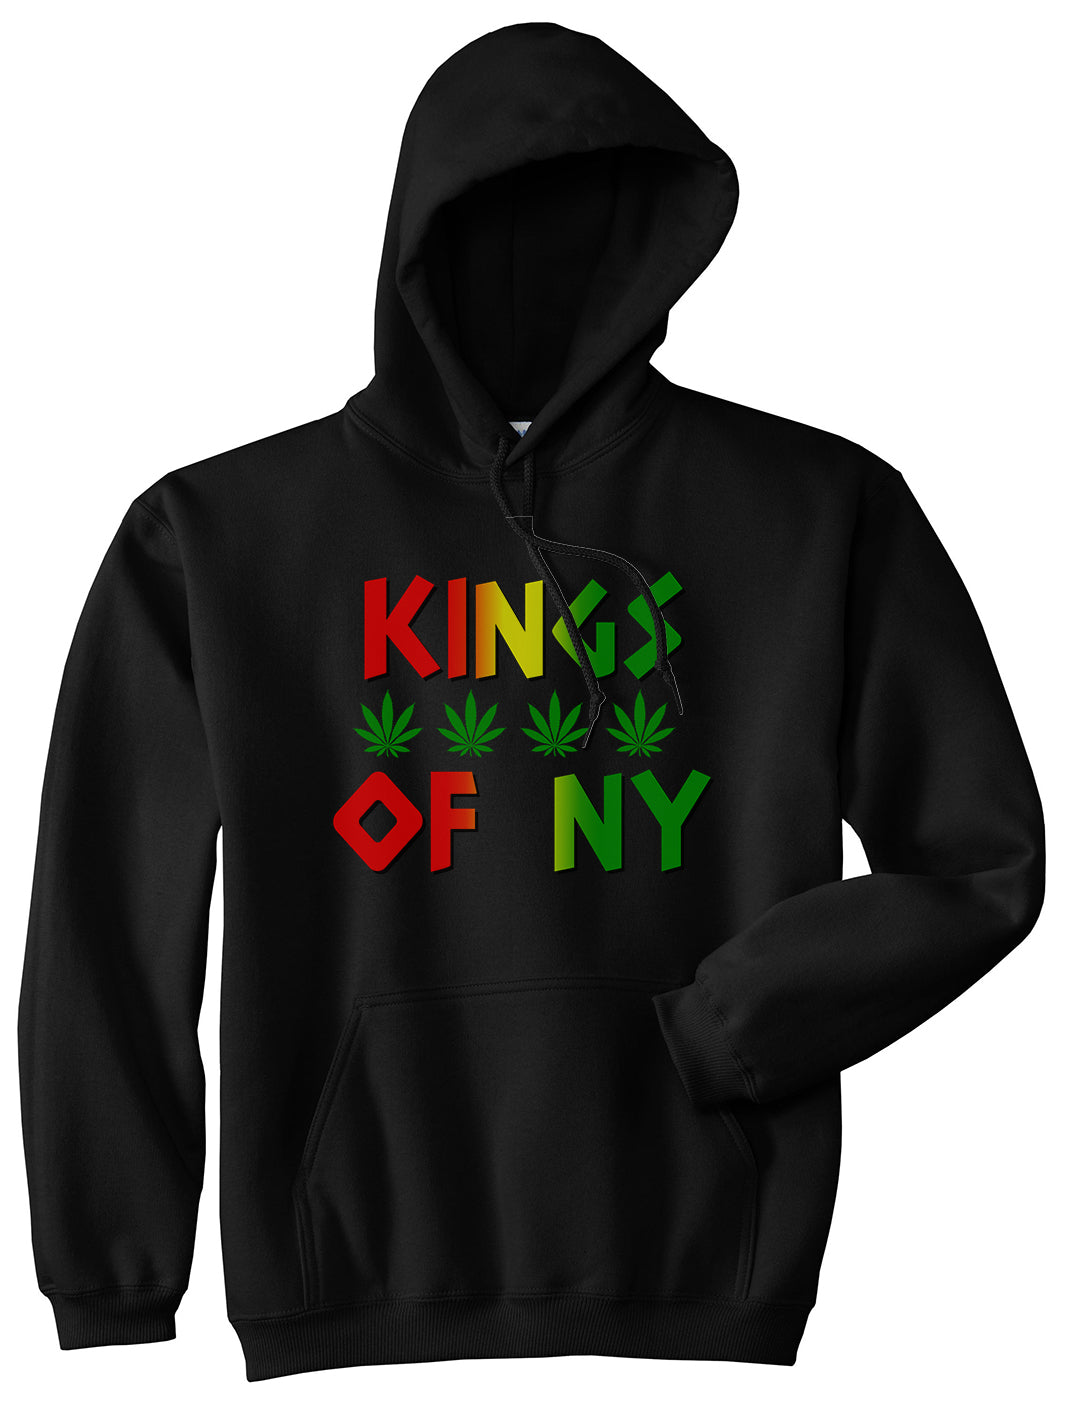 Puff Puff Pass Mens Pullover Hoodie Black by Kings Of NY